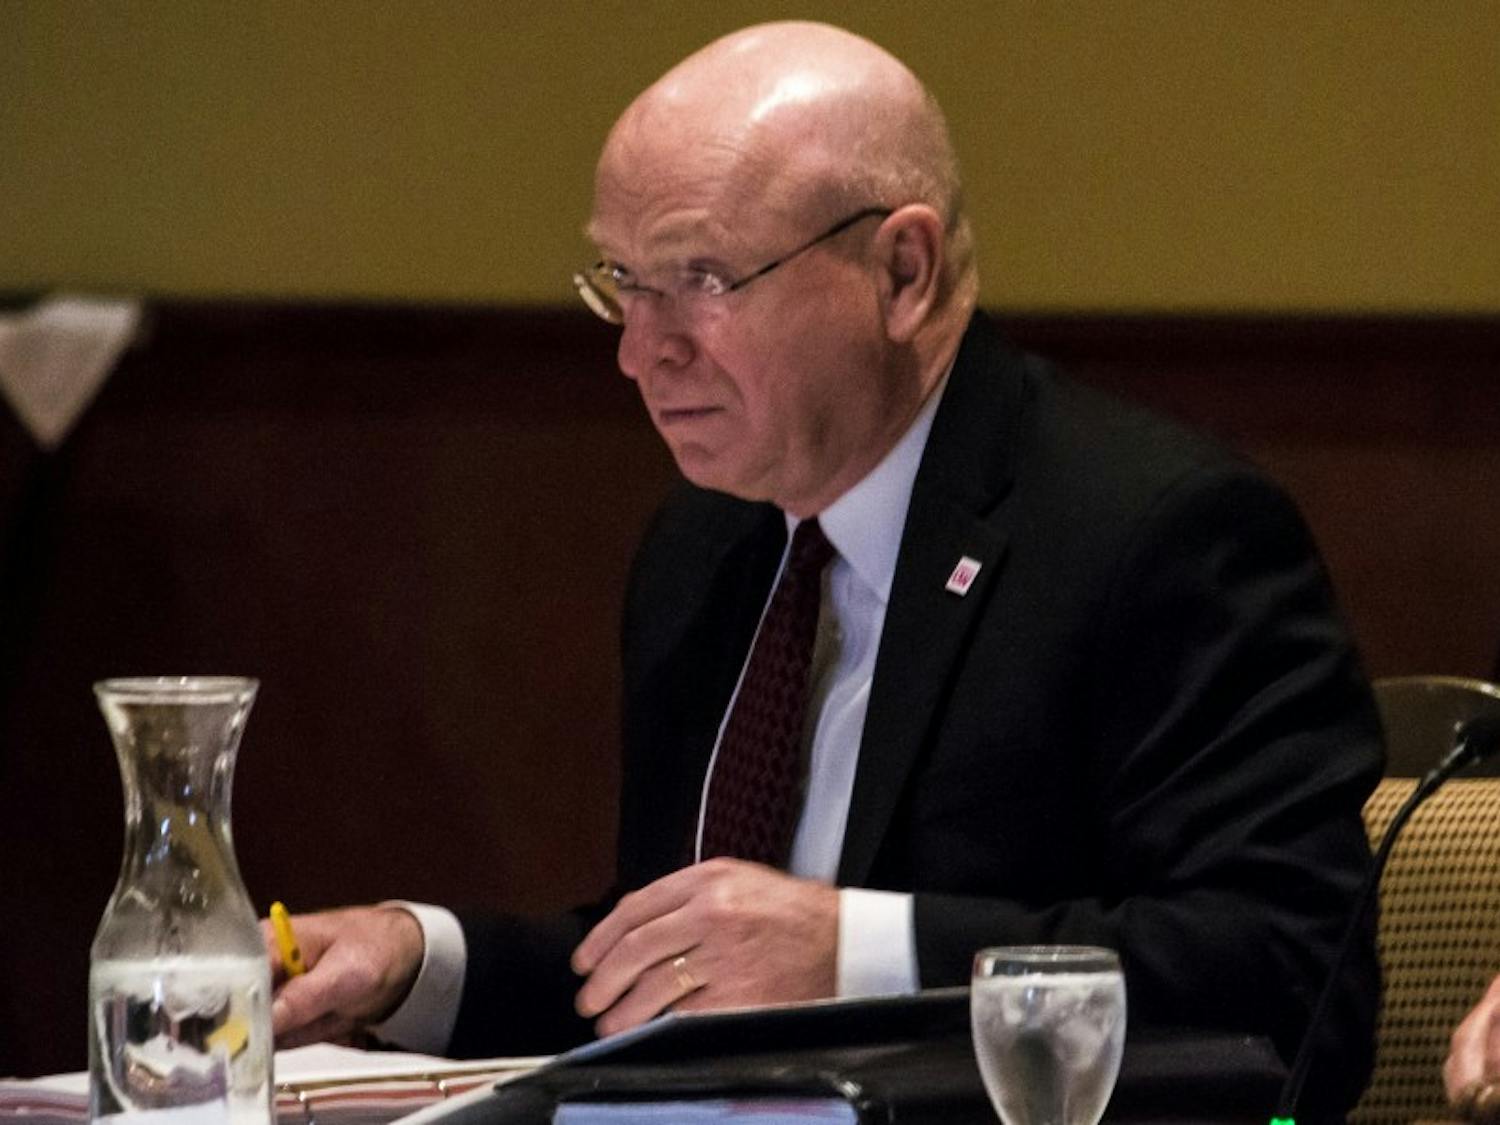 The UW-Madison Faculty Senate drafted a “No Confidence” resolution in UW System President Ray Cross and the Board of Regents.